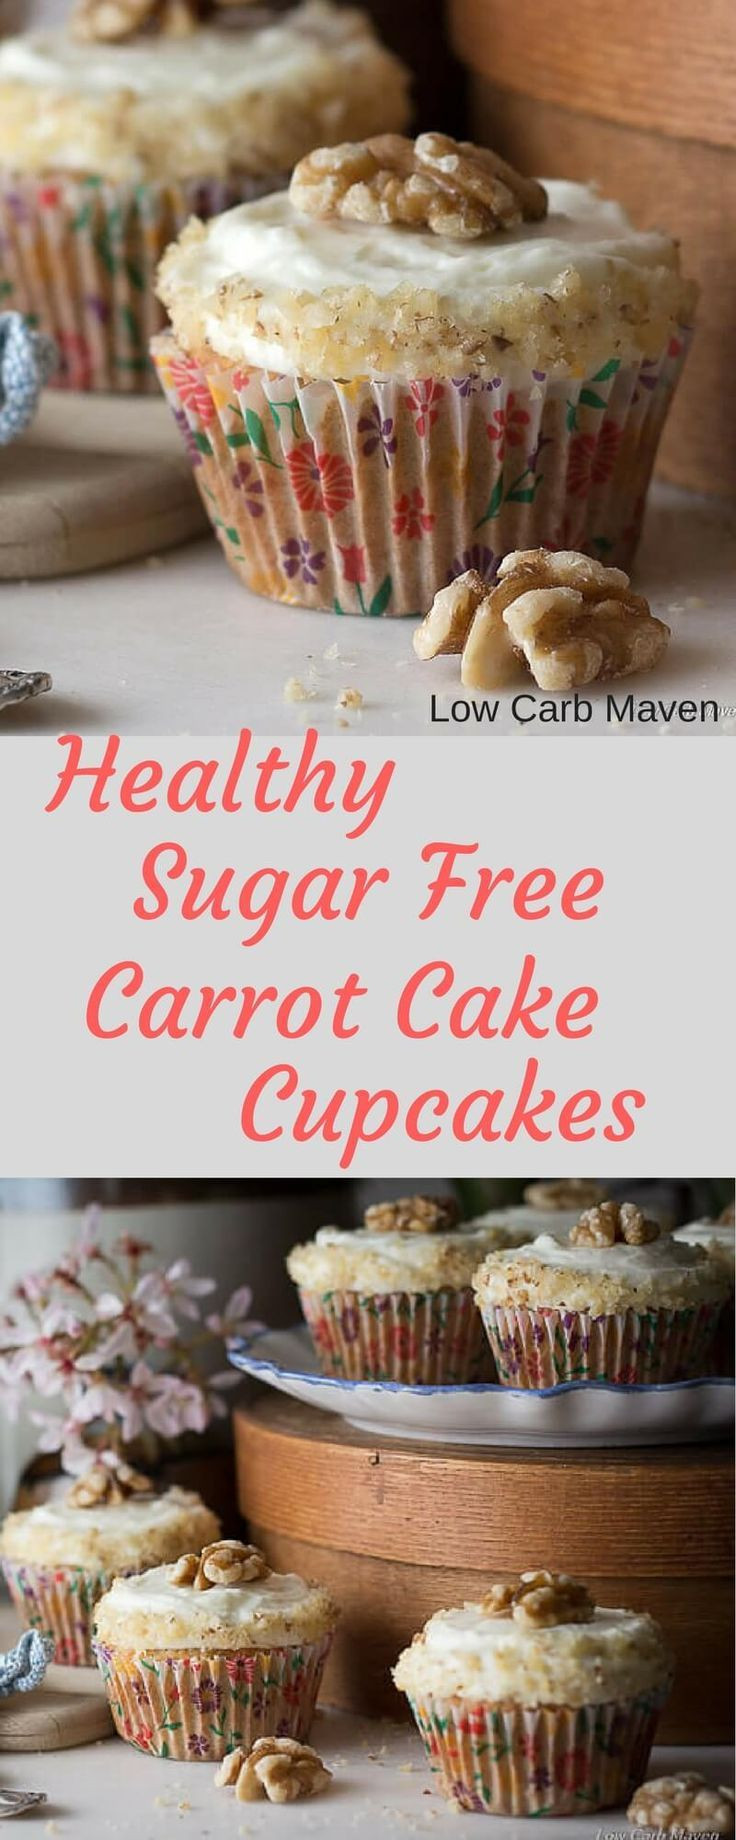 Diabetic Cupcake Recipes
 These carrot cake cupcakes are the best sugar free and low